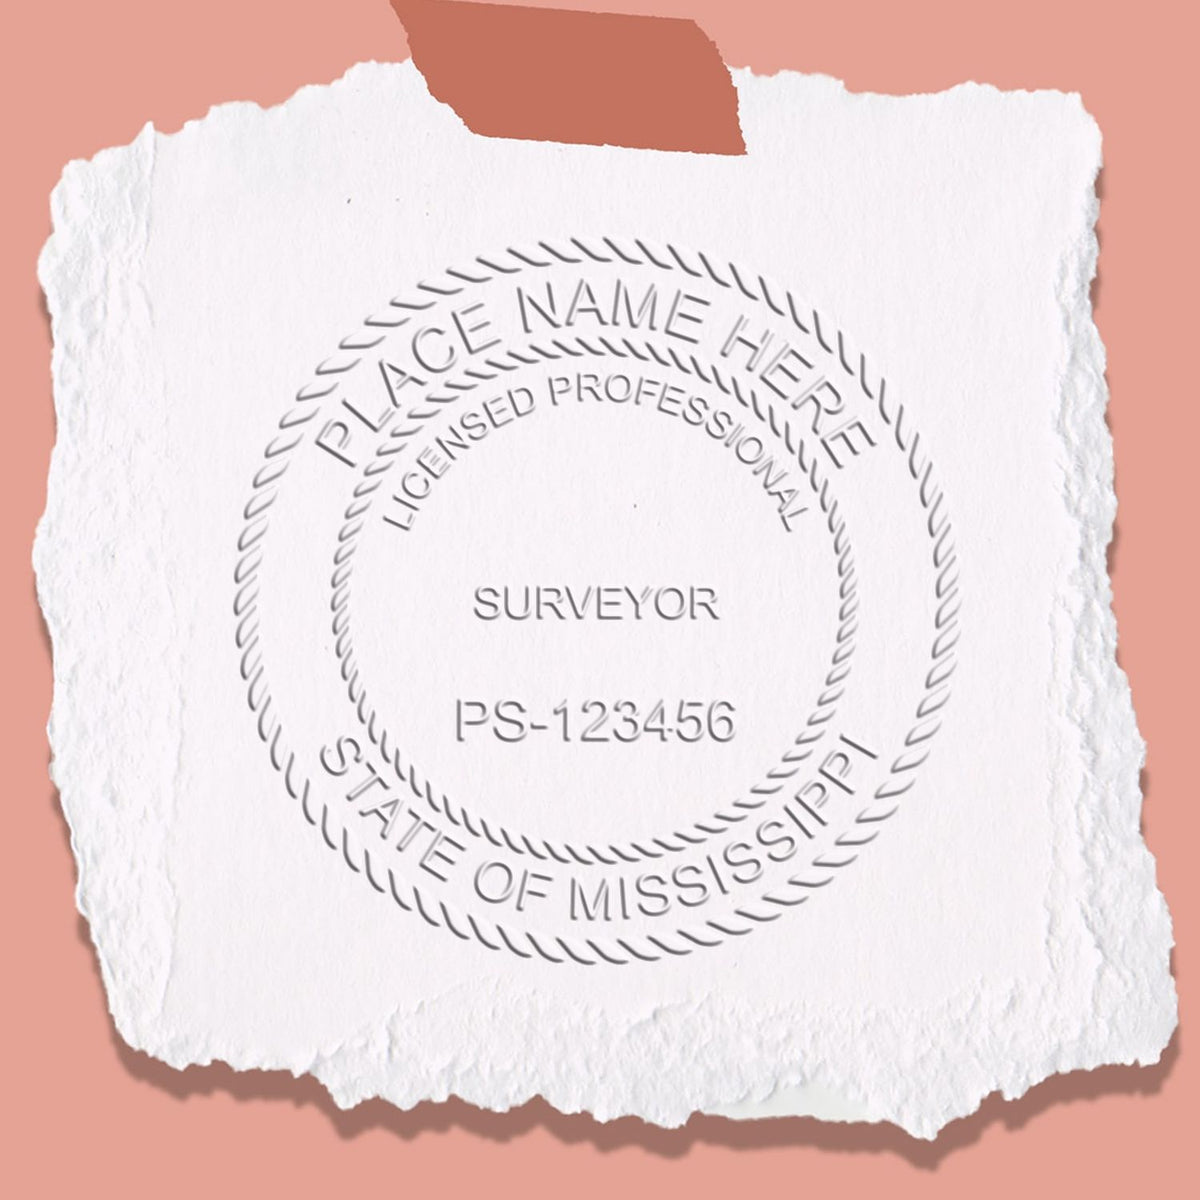 An in use photo of the Hybrid Mississippi Land Surveyor Seal showing a sample imprint on a cardstock